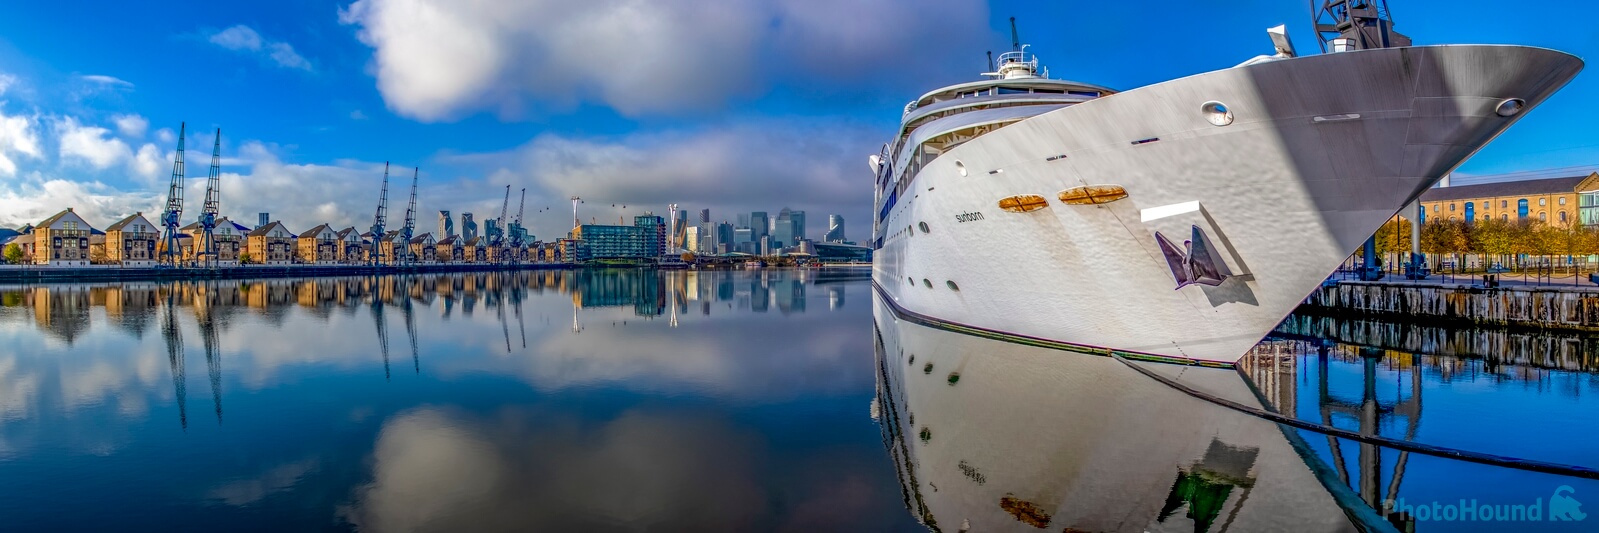 Image of Sunborn Yacht by Doug Stratton